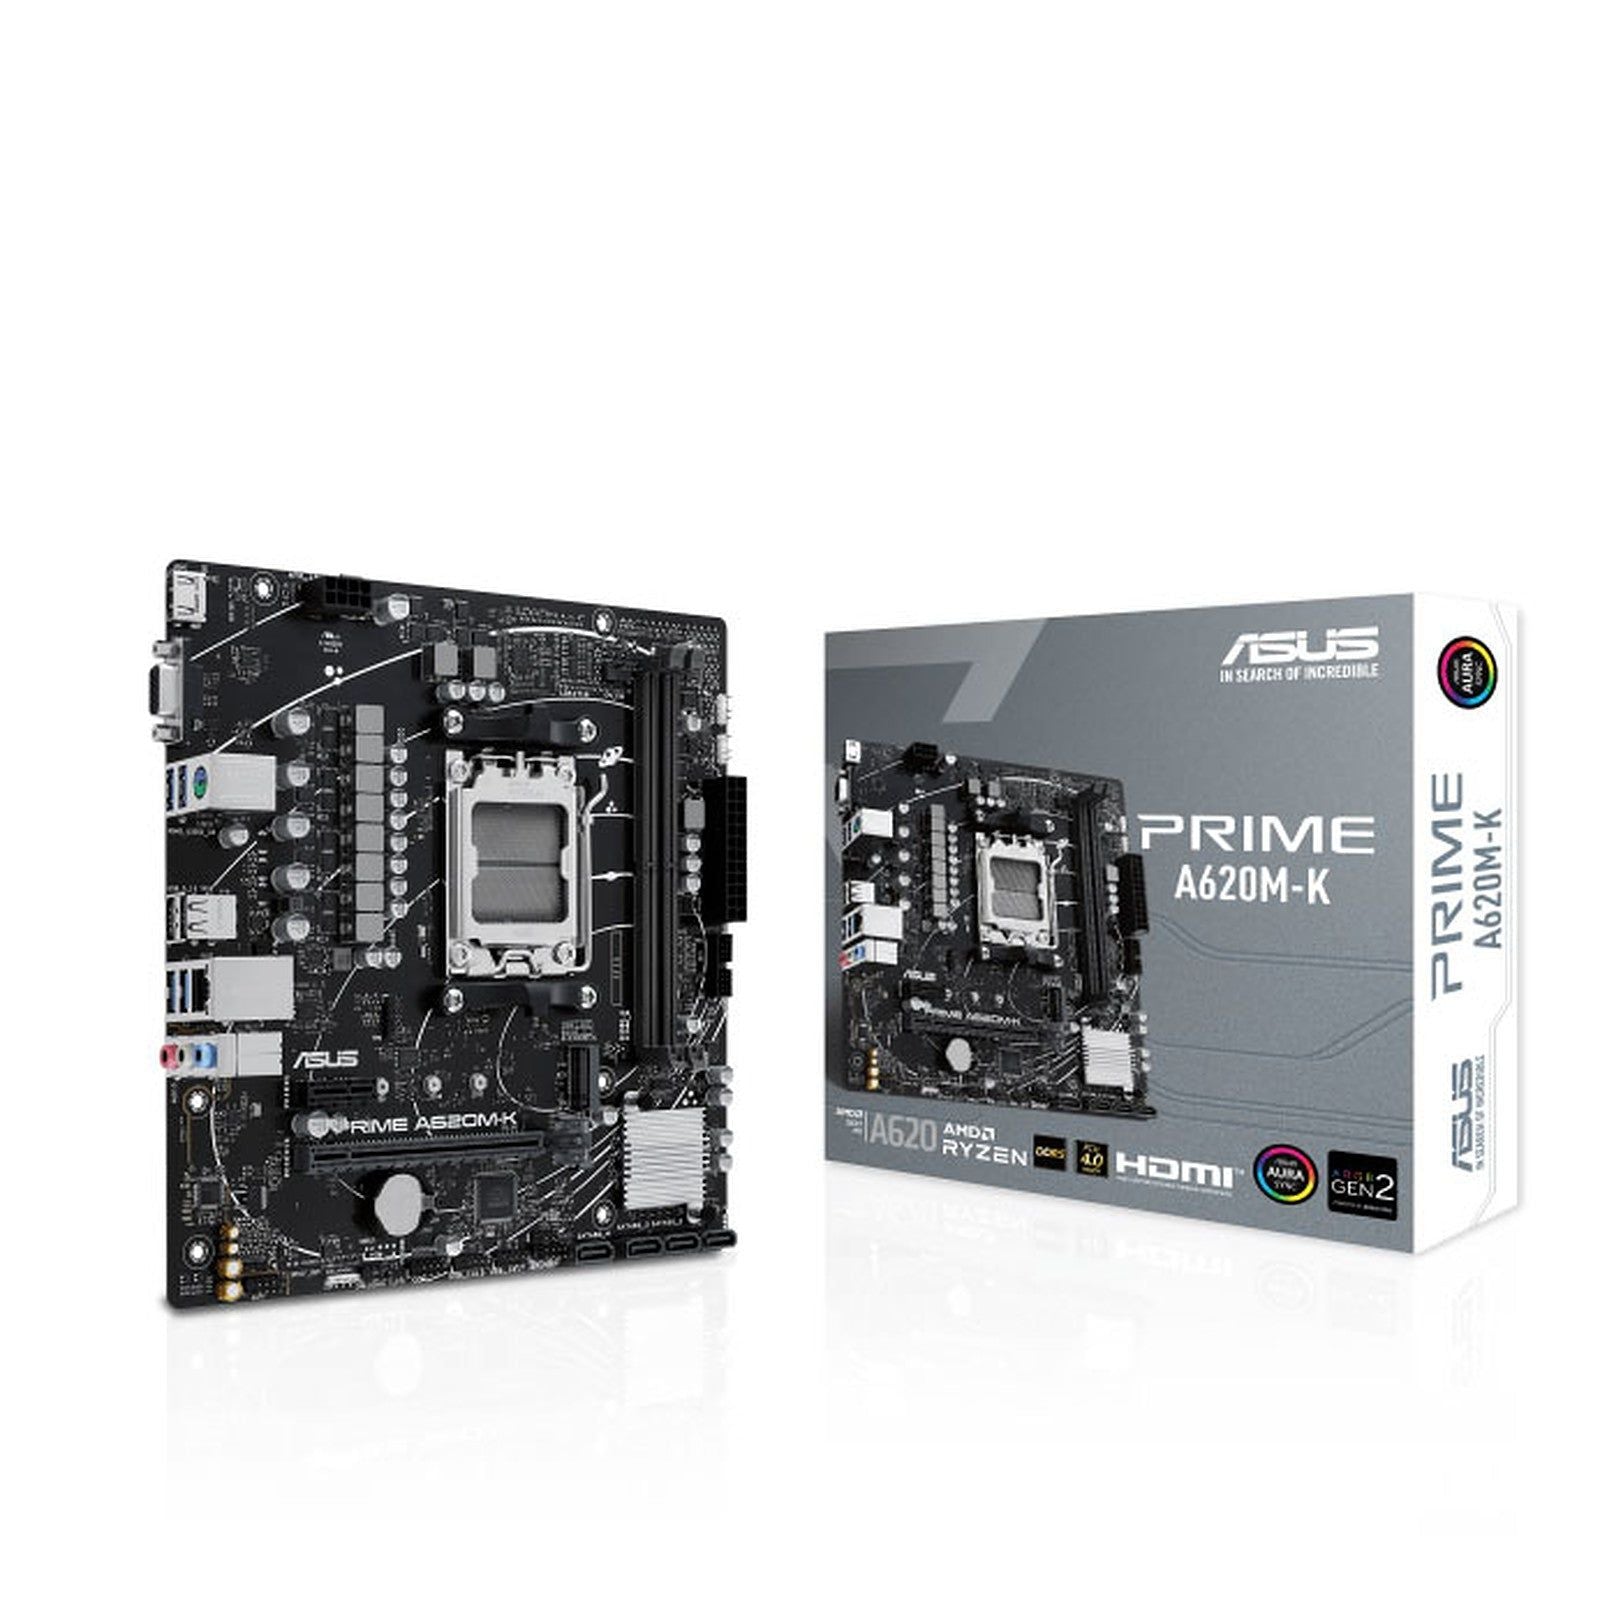 ASUS PRIME A620M-K - OVERCLOCK Computer